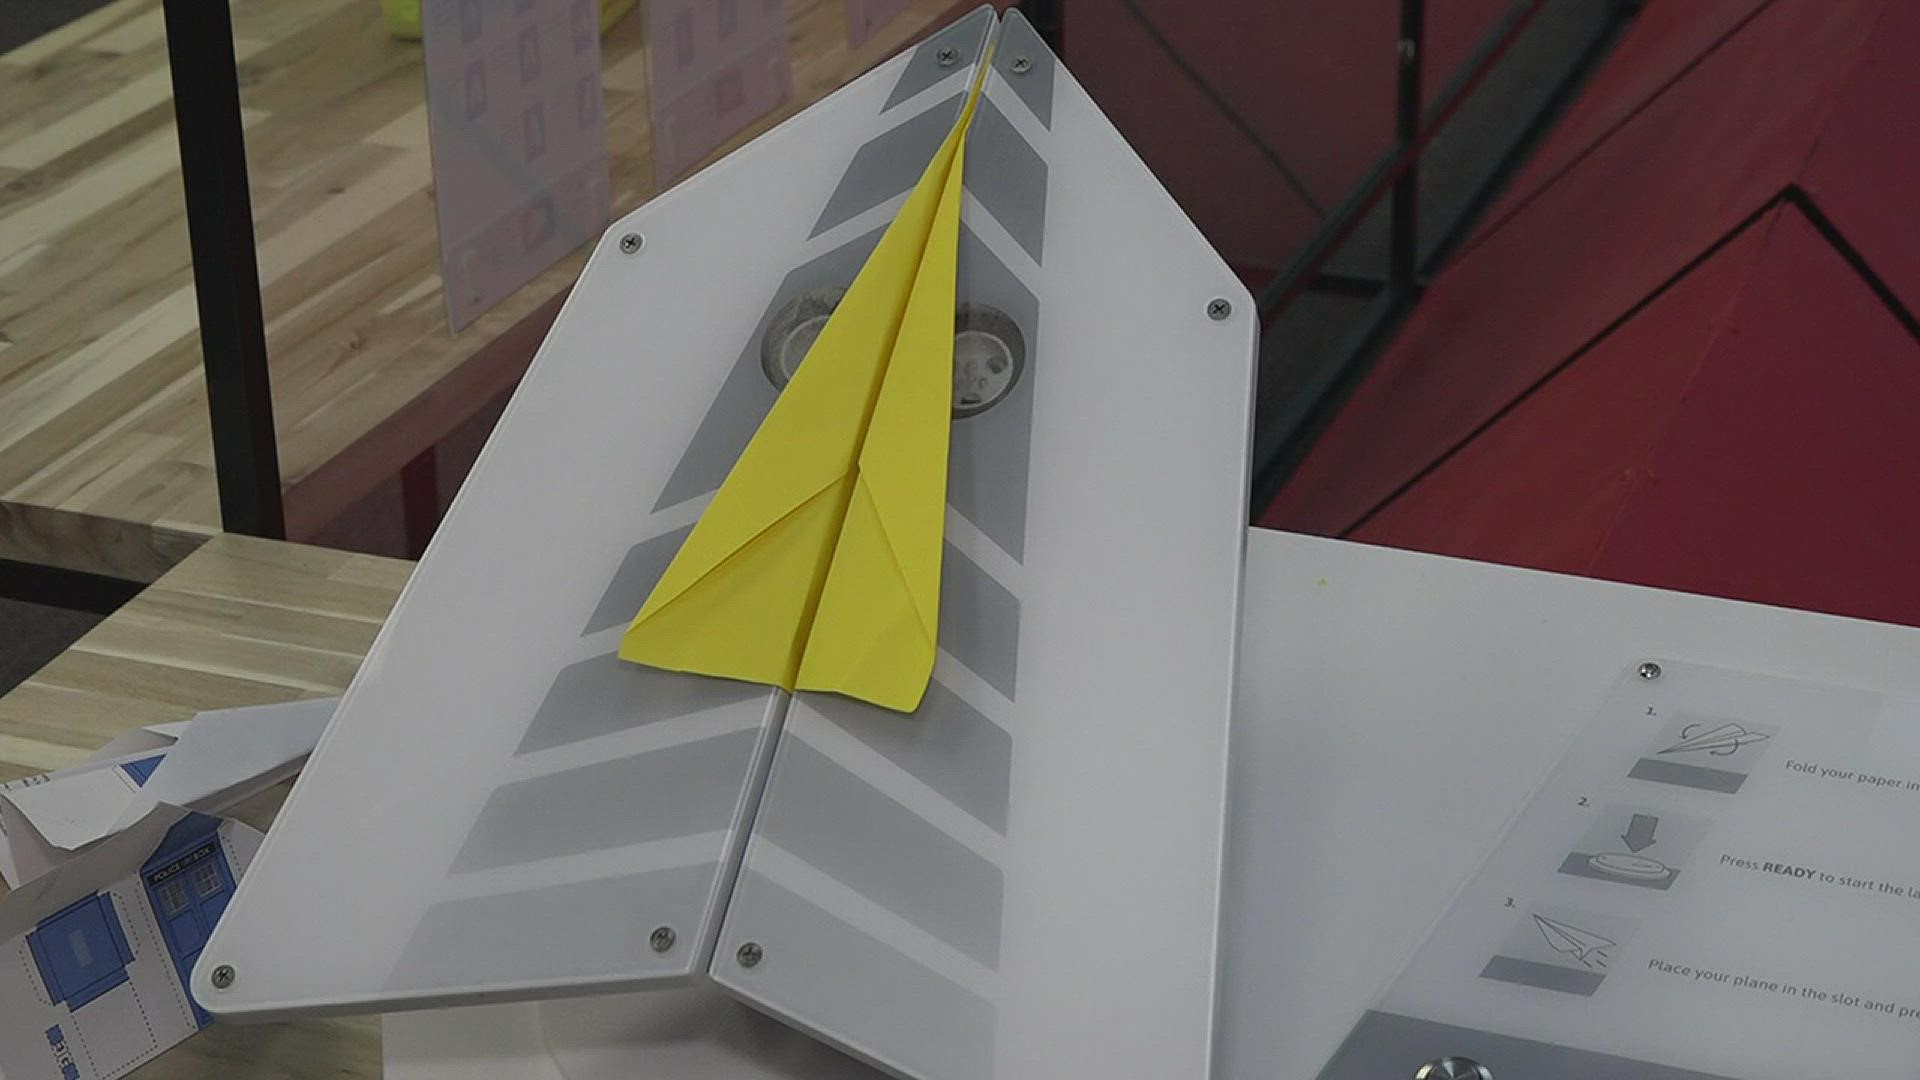 The interactive paper airplane exhibit, called the Launch, was designed by engineering students from Lamar University.